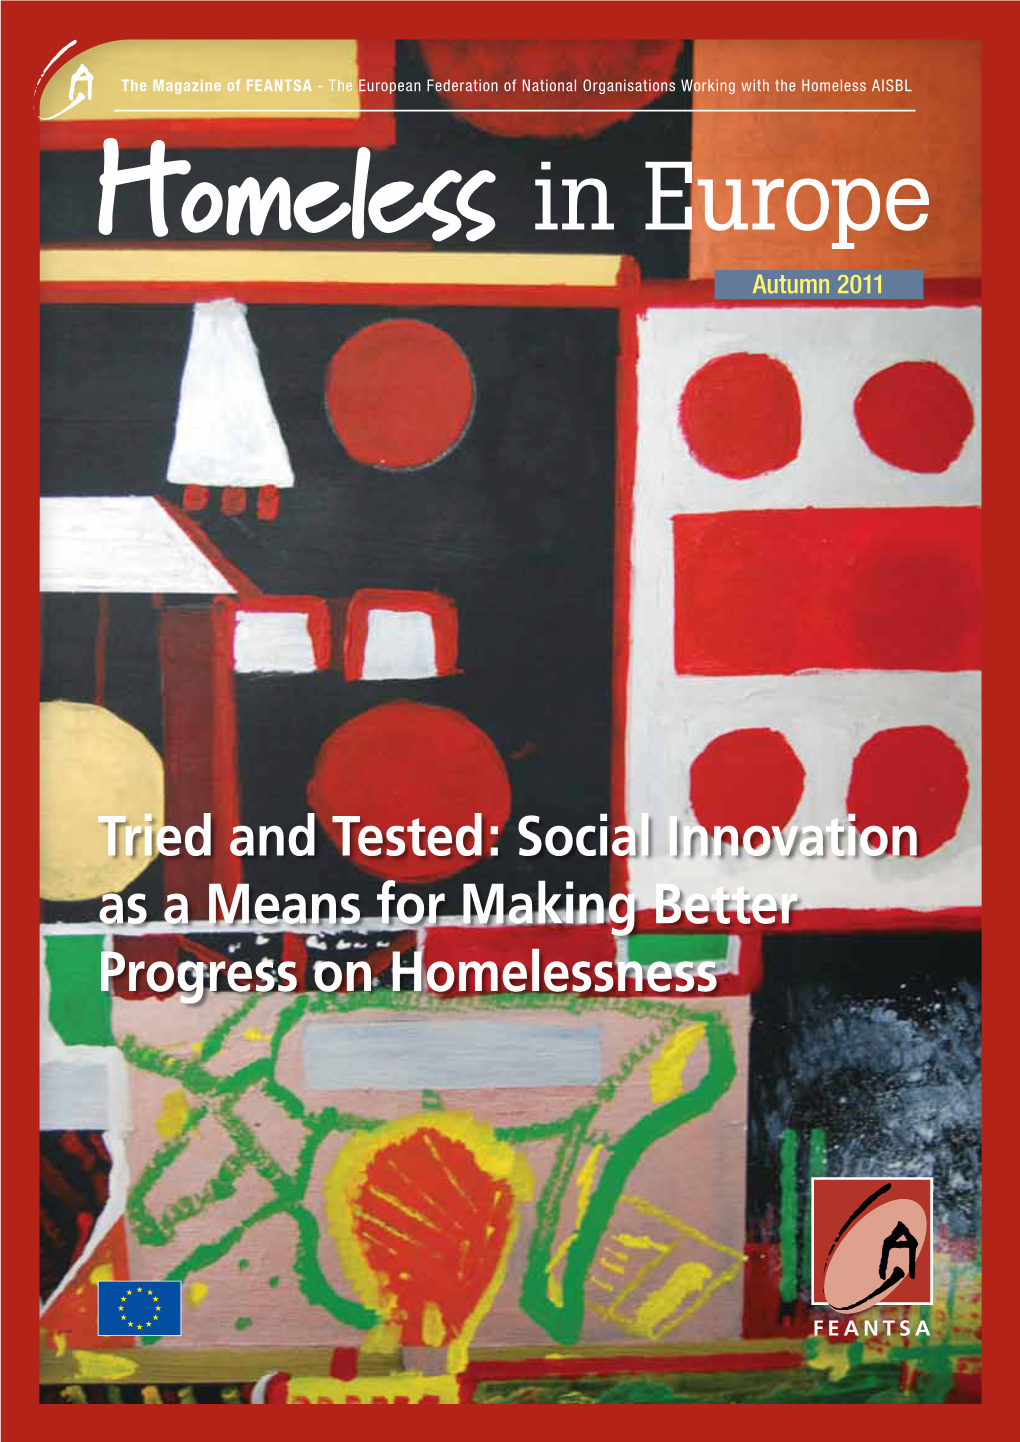 Homeless in Europe Do Not Necessarily Reflect the Views of FEANTSA